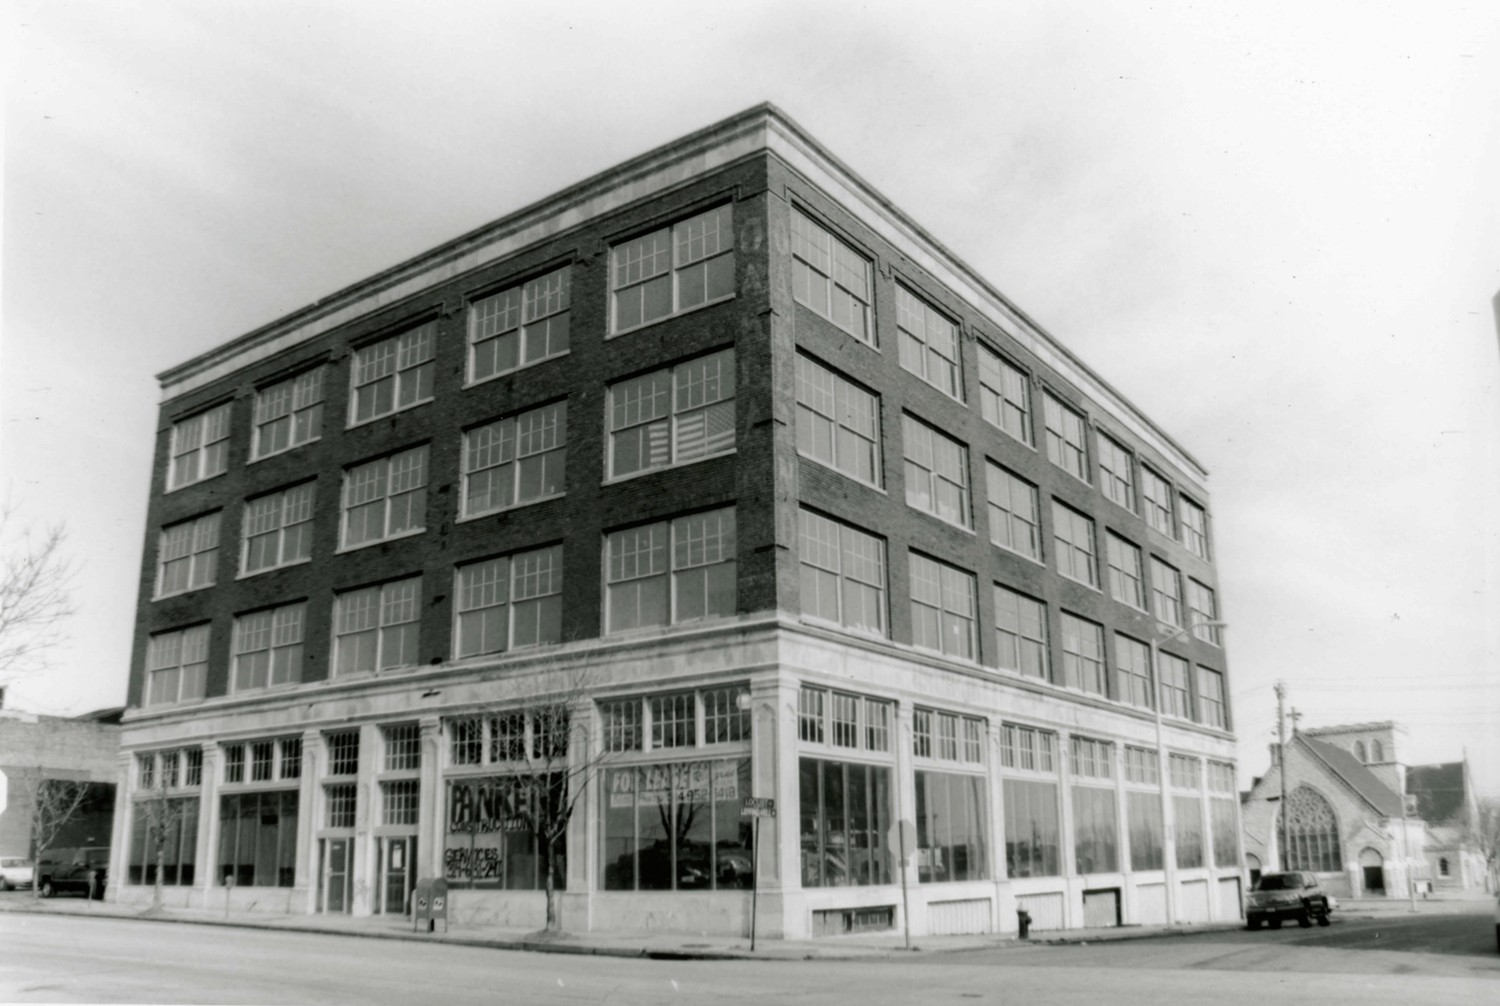 More Automobile Company - Marmon Autos, St. Louis Missouri South facade and east elevation looking northwest (2008)